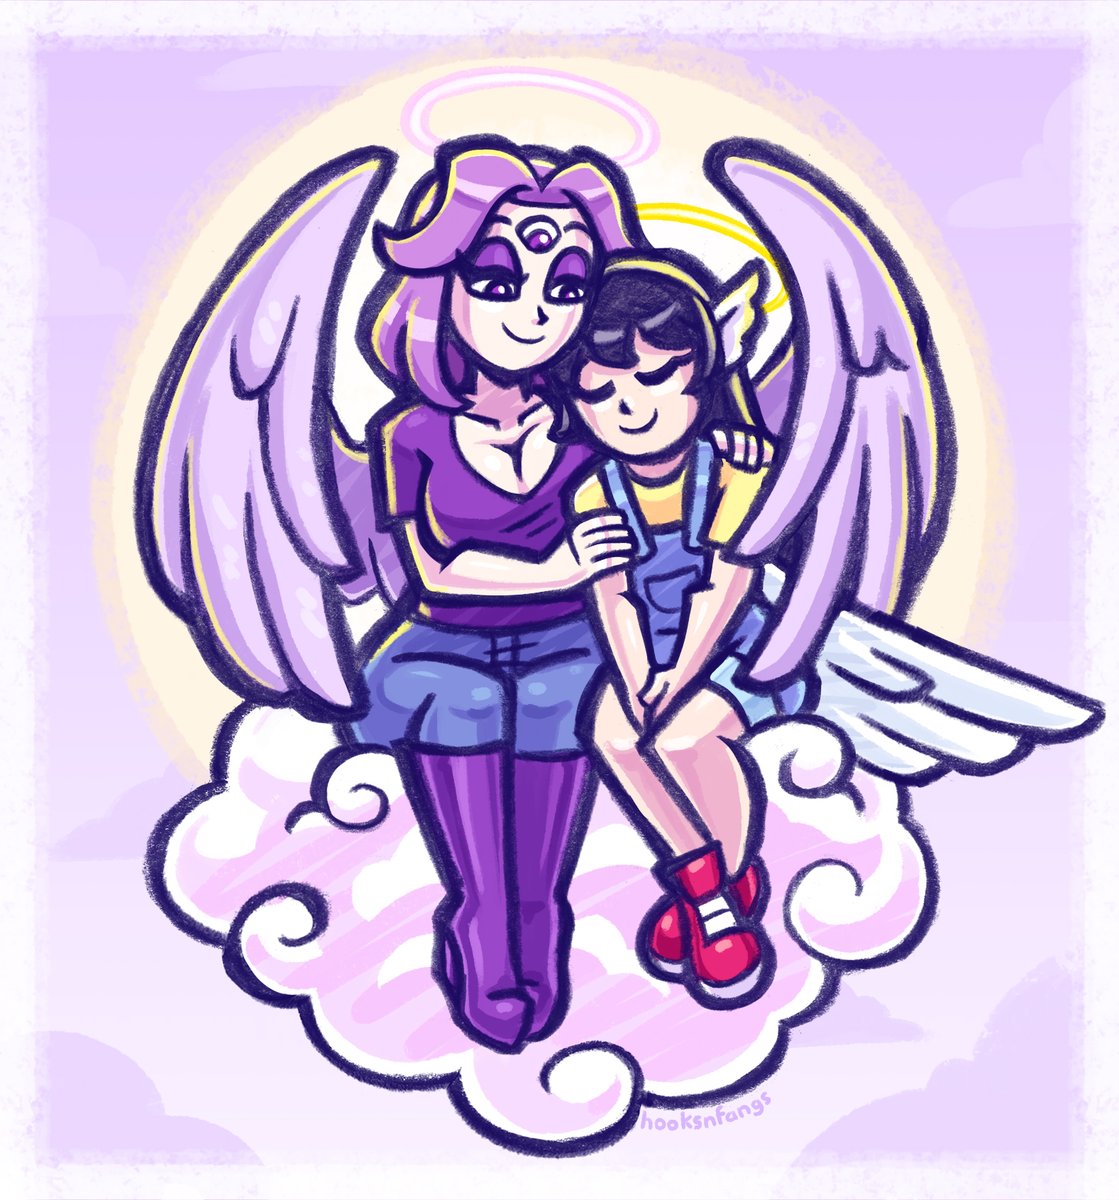 Commission for @Nameless_Fool featuring two angels resting on a cloud! Awww how cute!